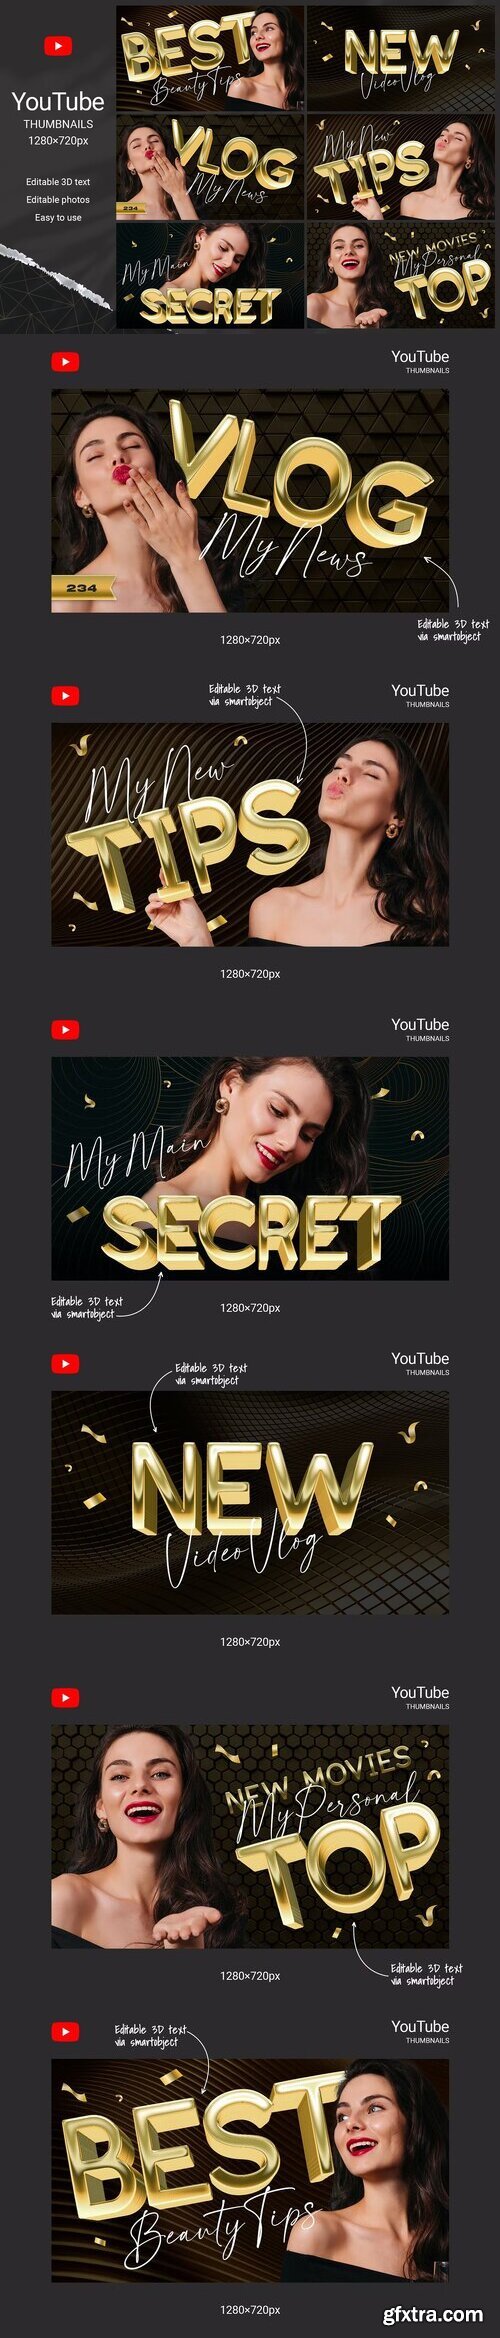 CreativeMarket - YouTube Thumbnails with Gold Text 7812255